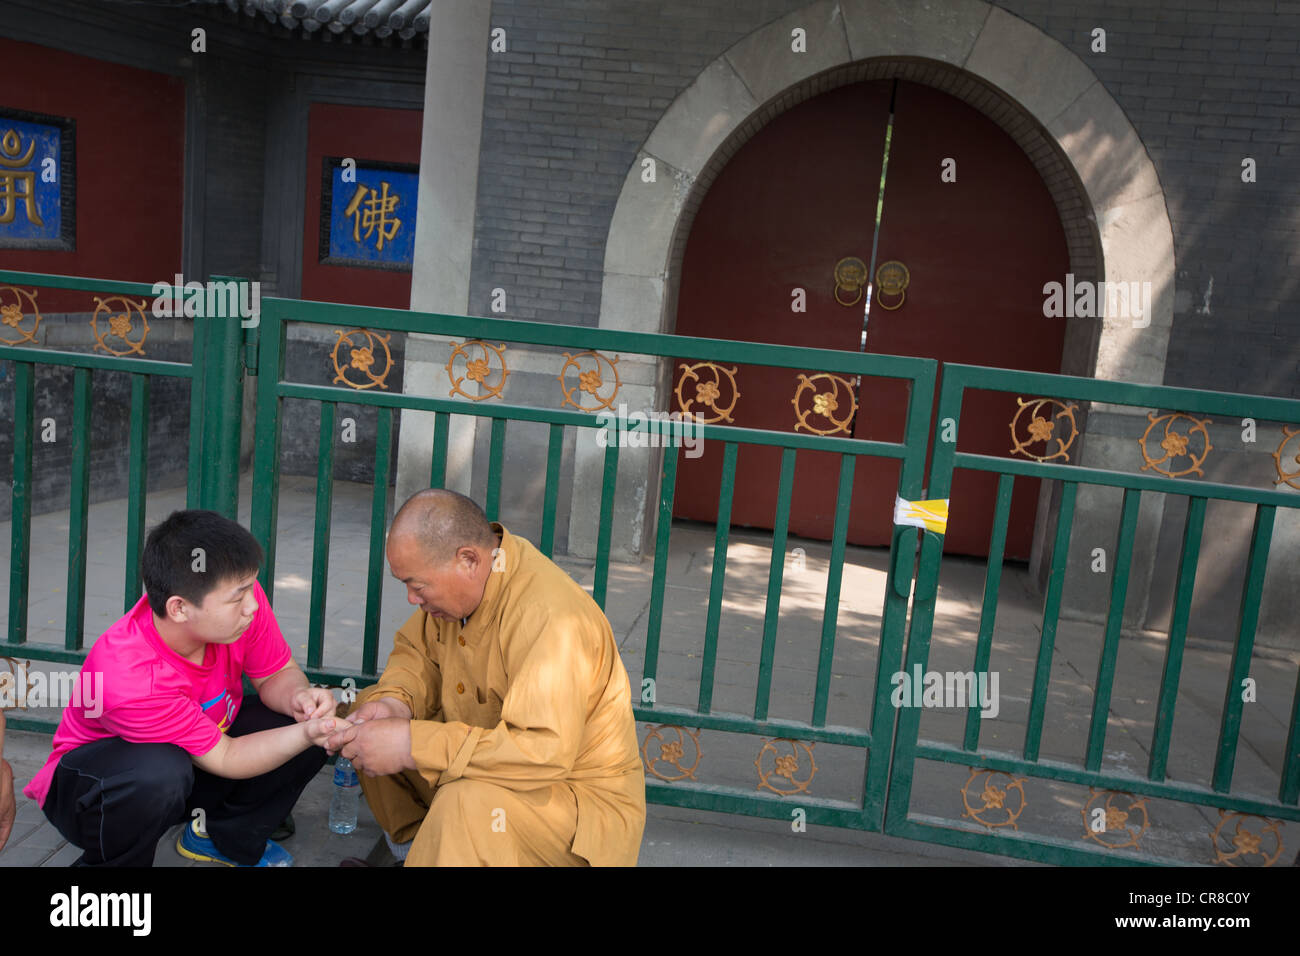 Fortune telling, palm reading at GuangJi Temple, in Beijing, China Stock Photo